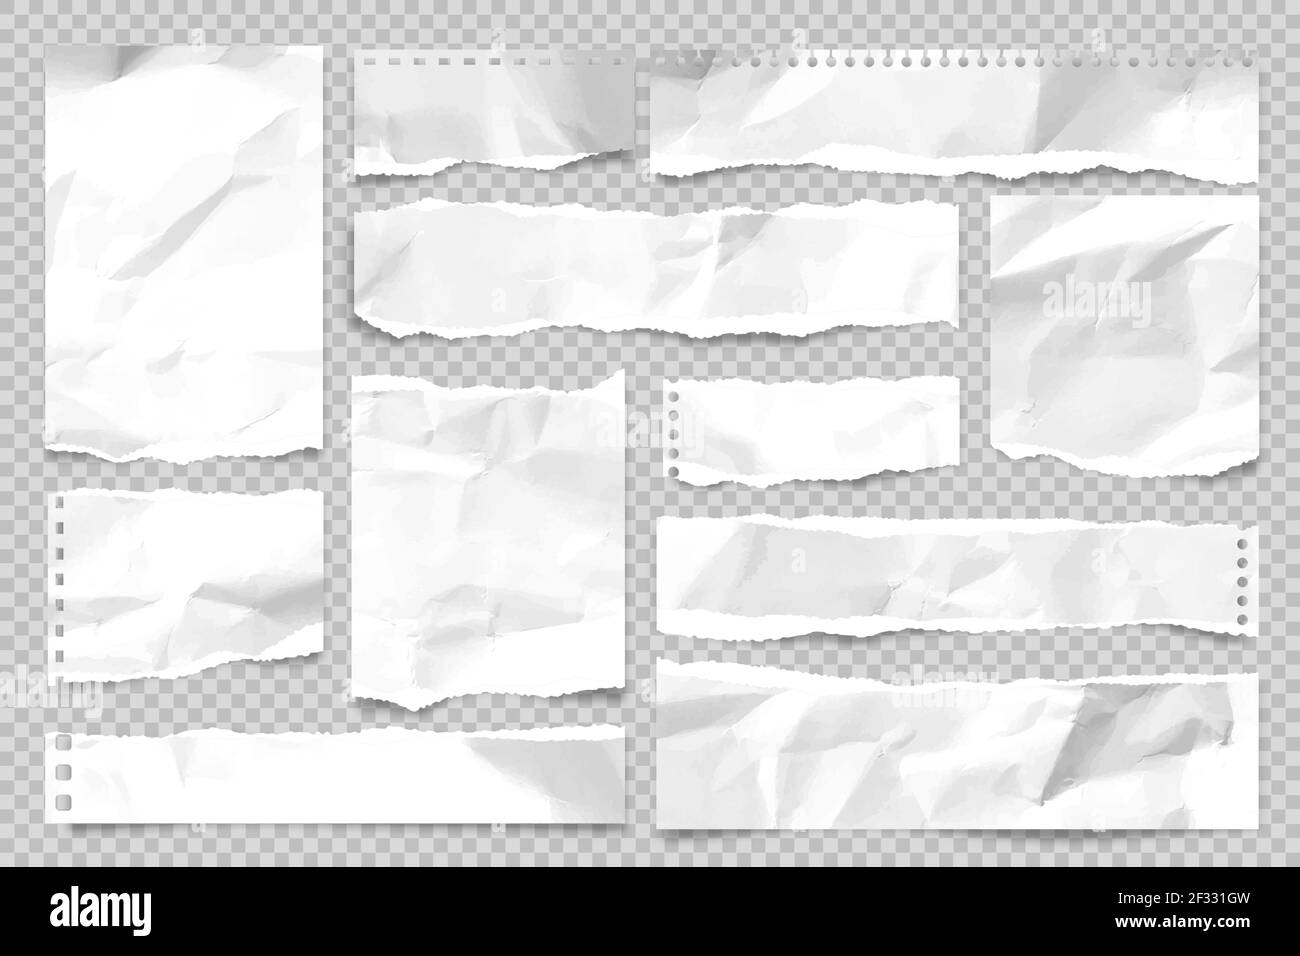 Post it notes Black and White Stock Photos & Images - Alamy